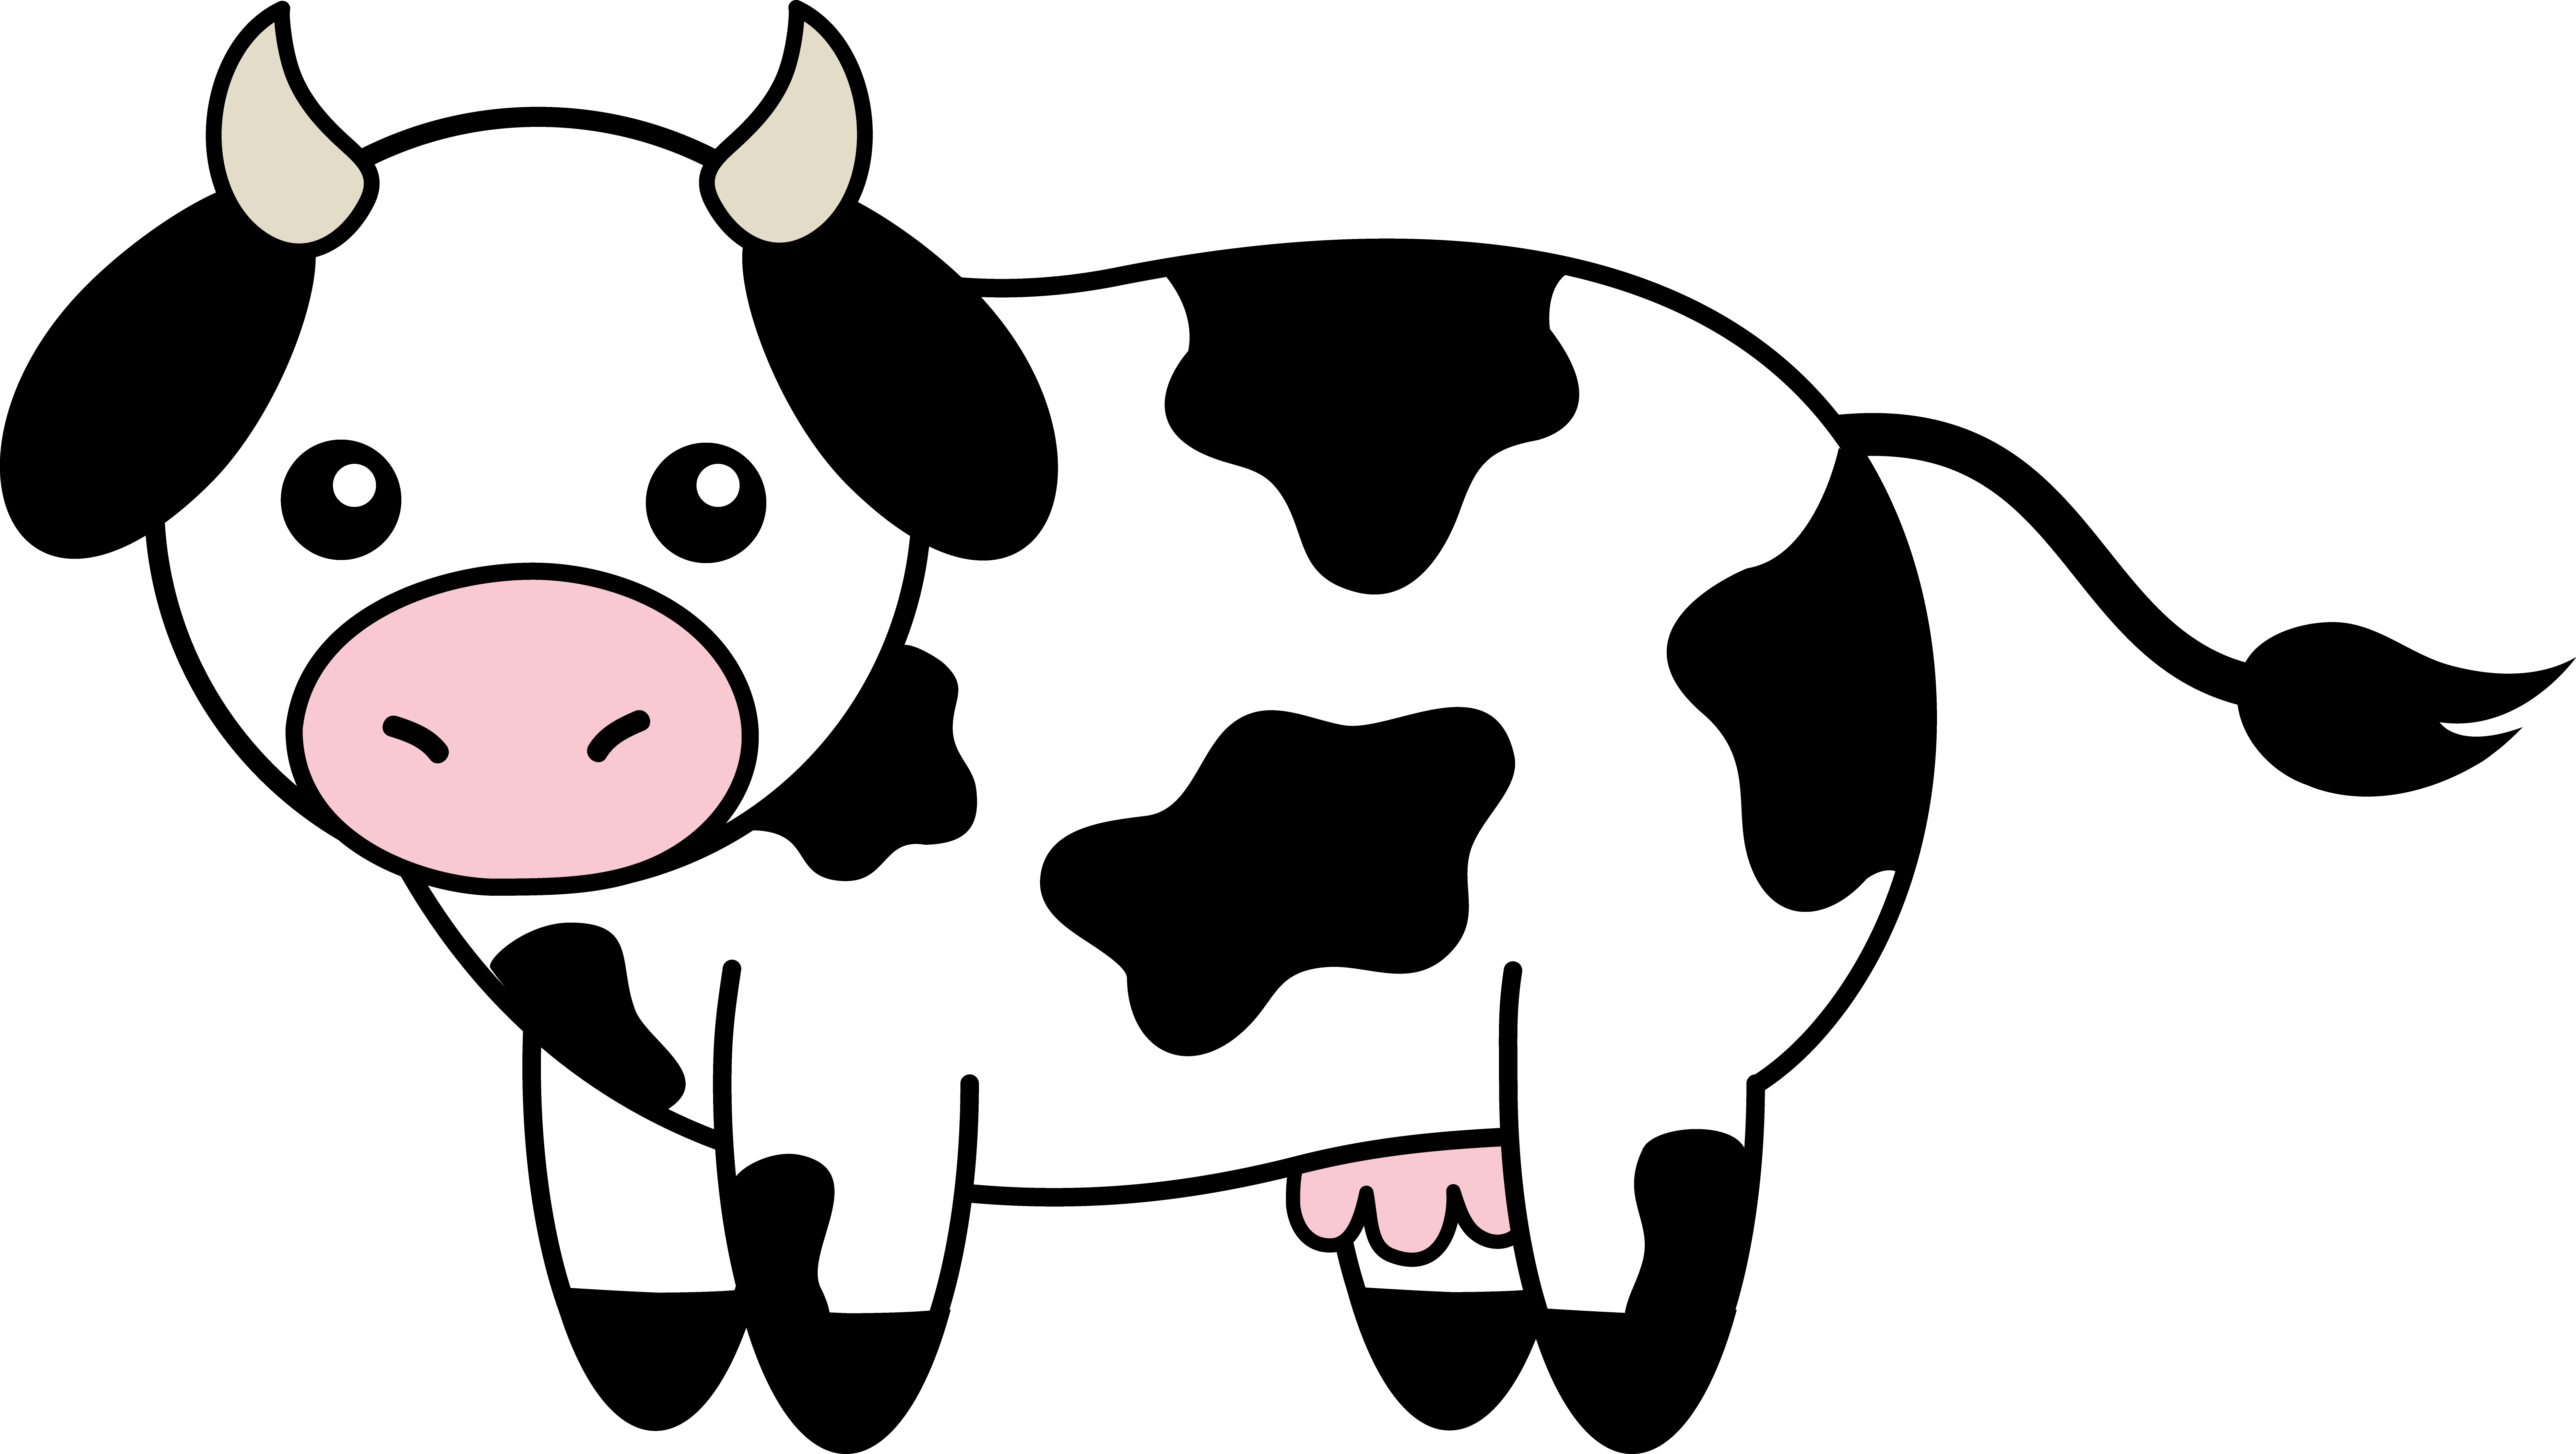 Cow Cartoons Pictures - Cliparts.co